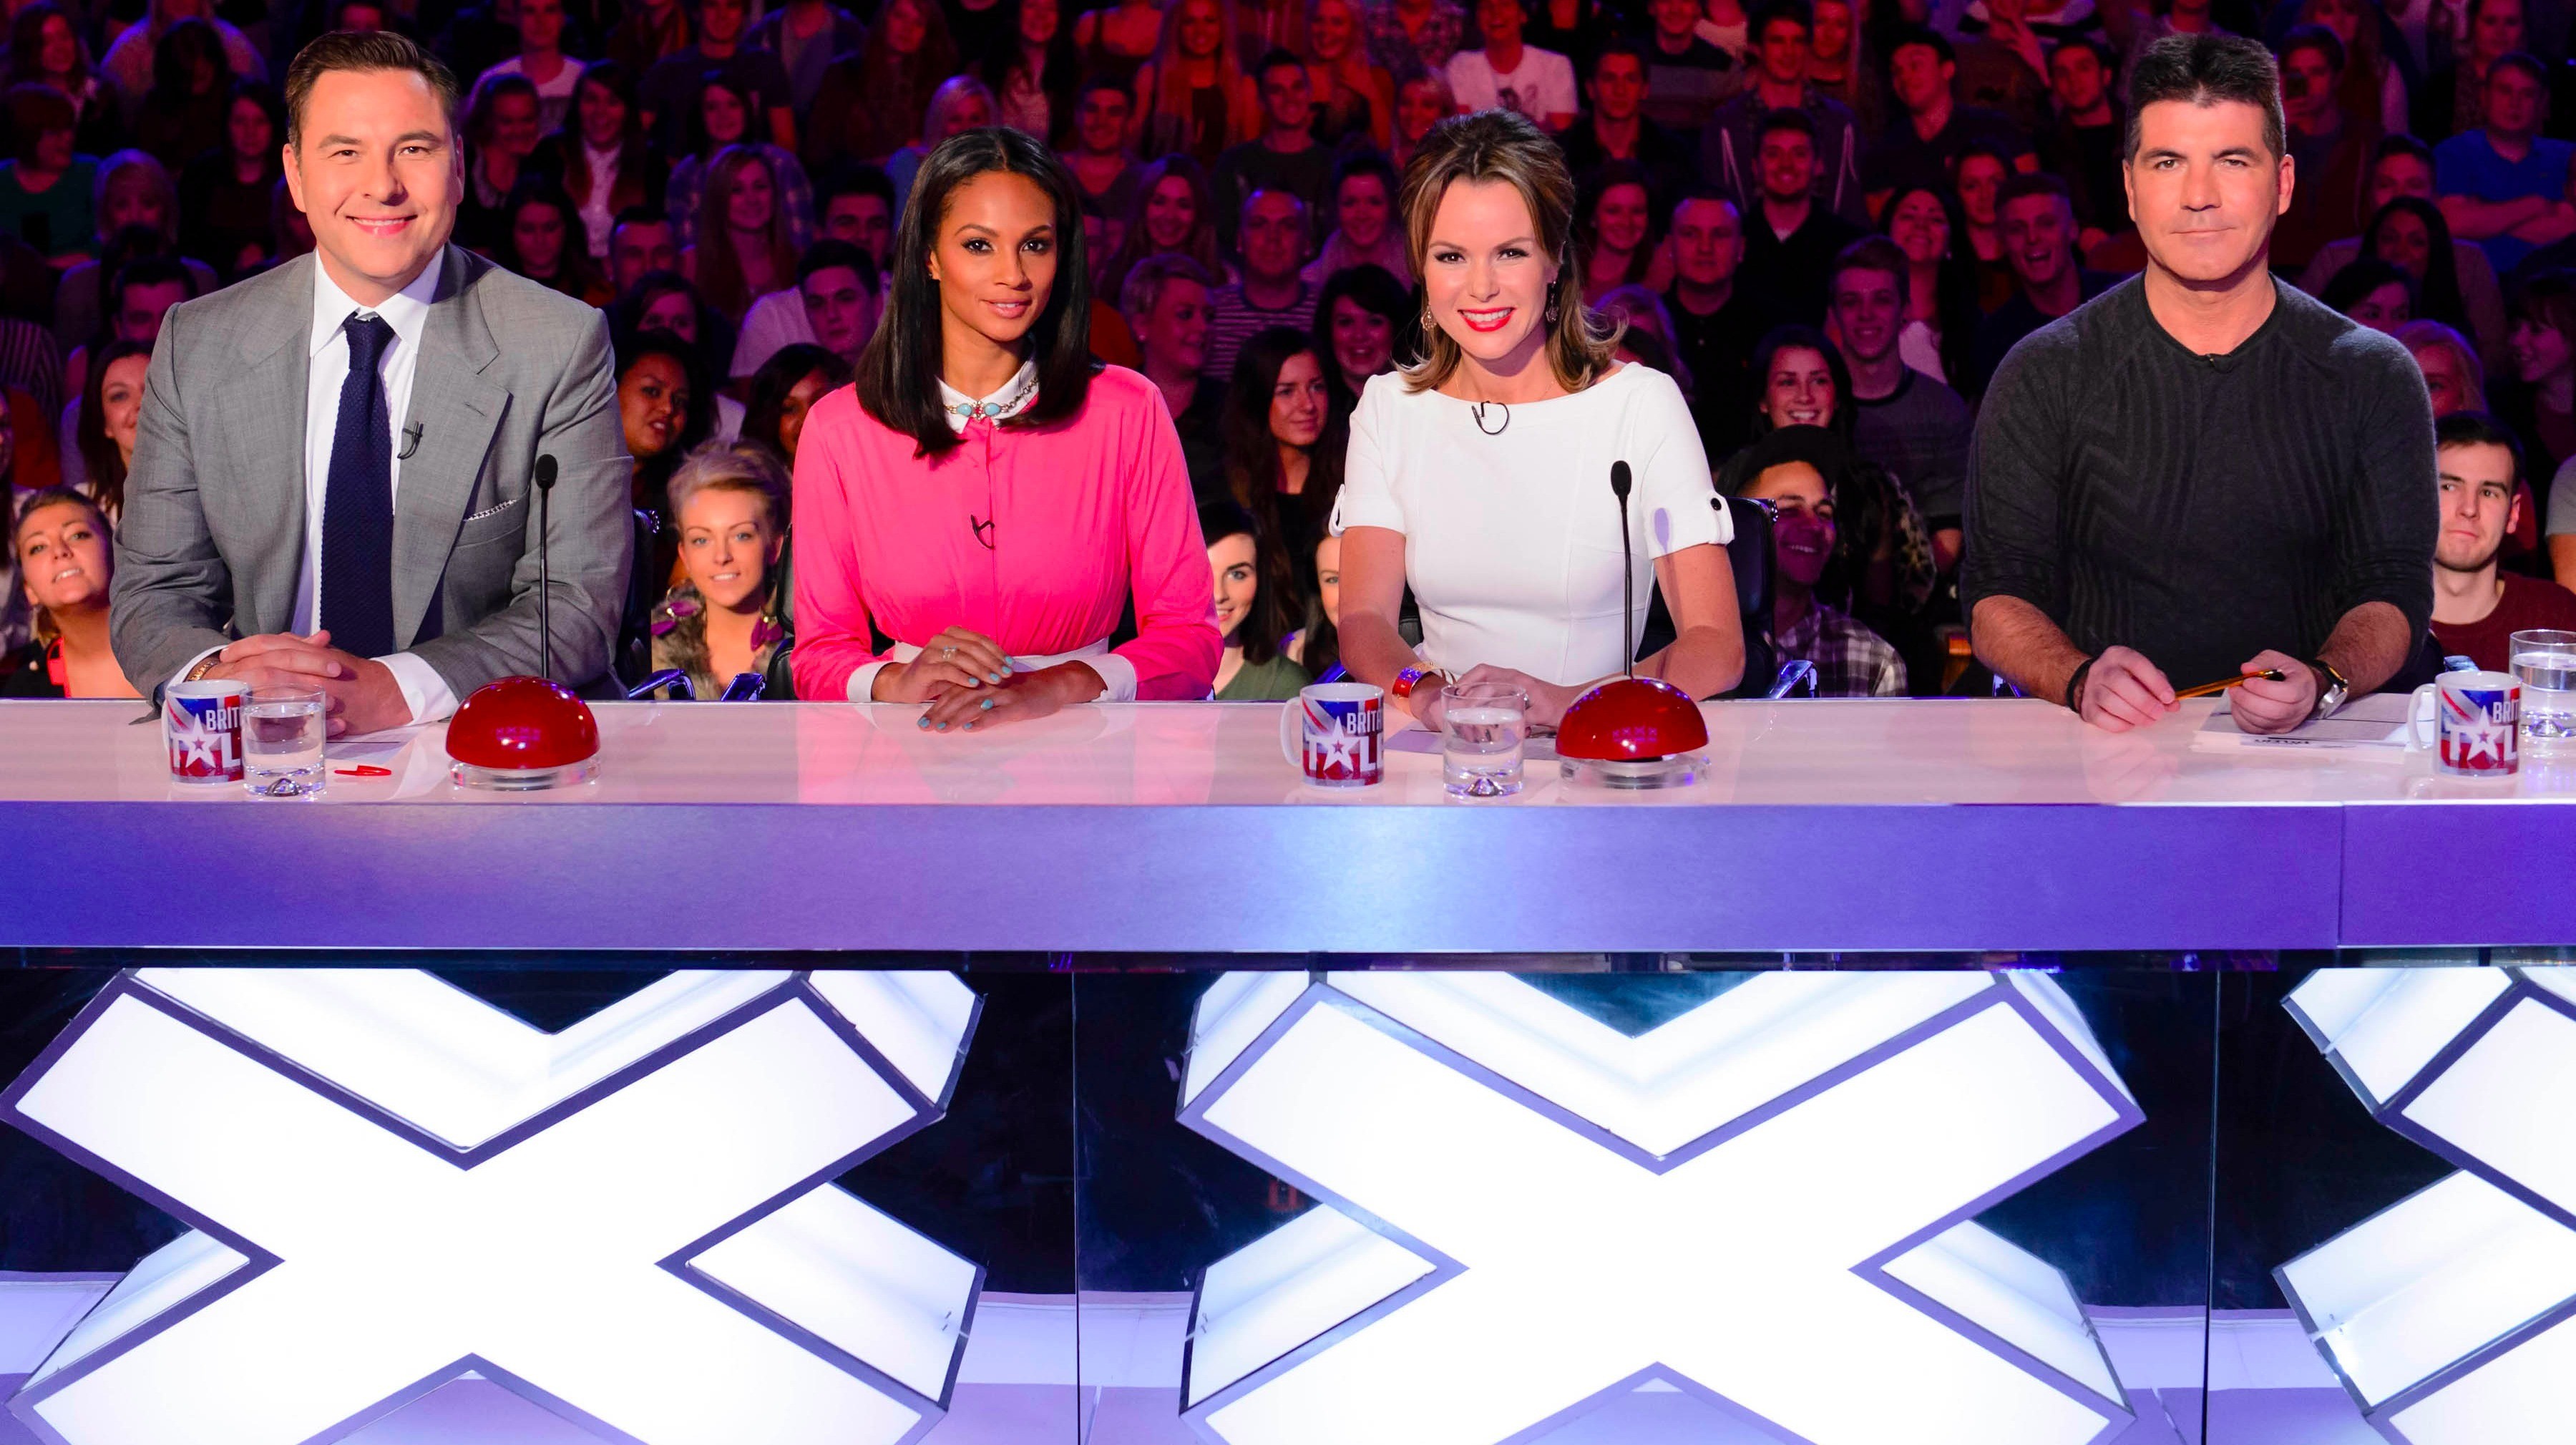 Britain's Got Talent is back and the Judges are all set for the 10th